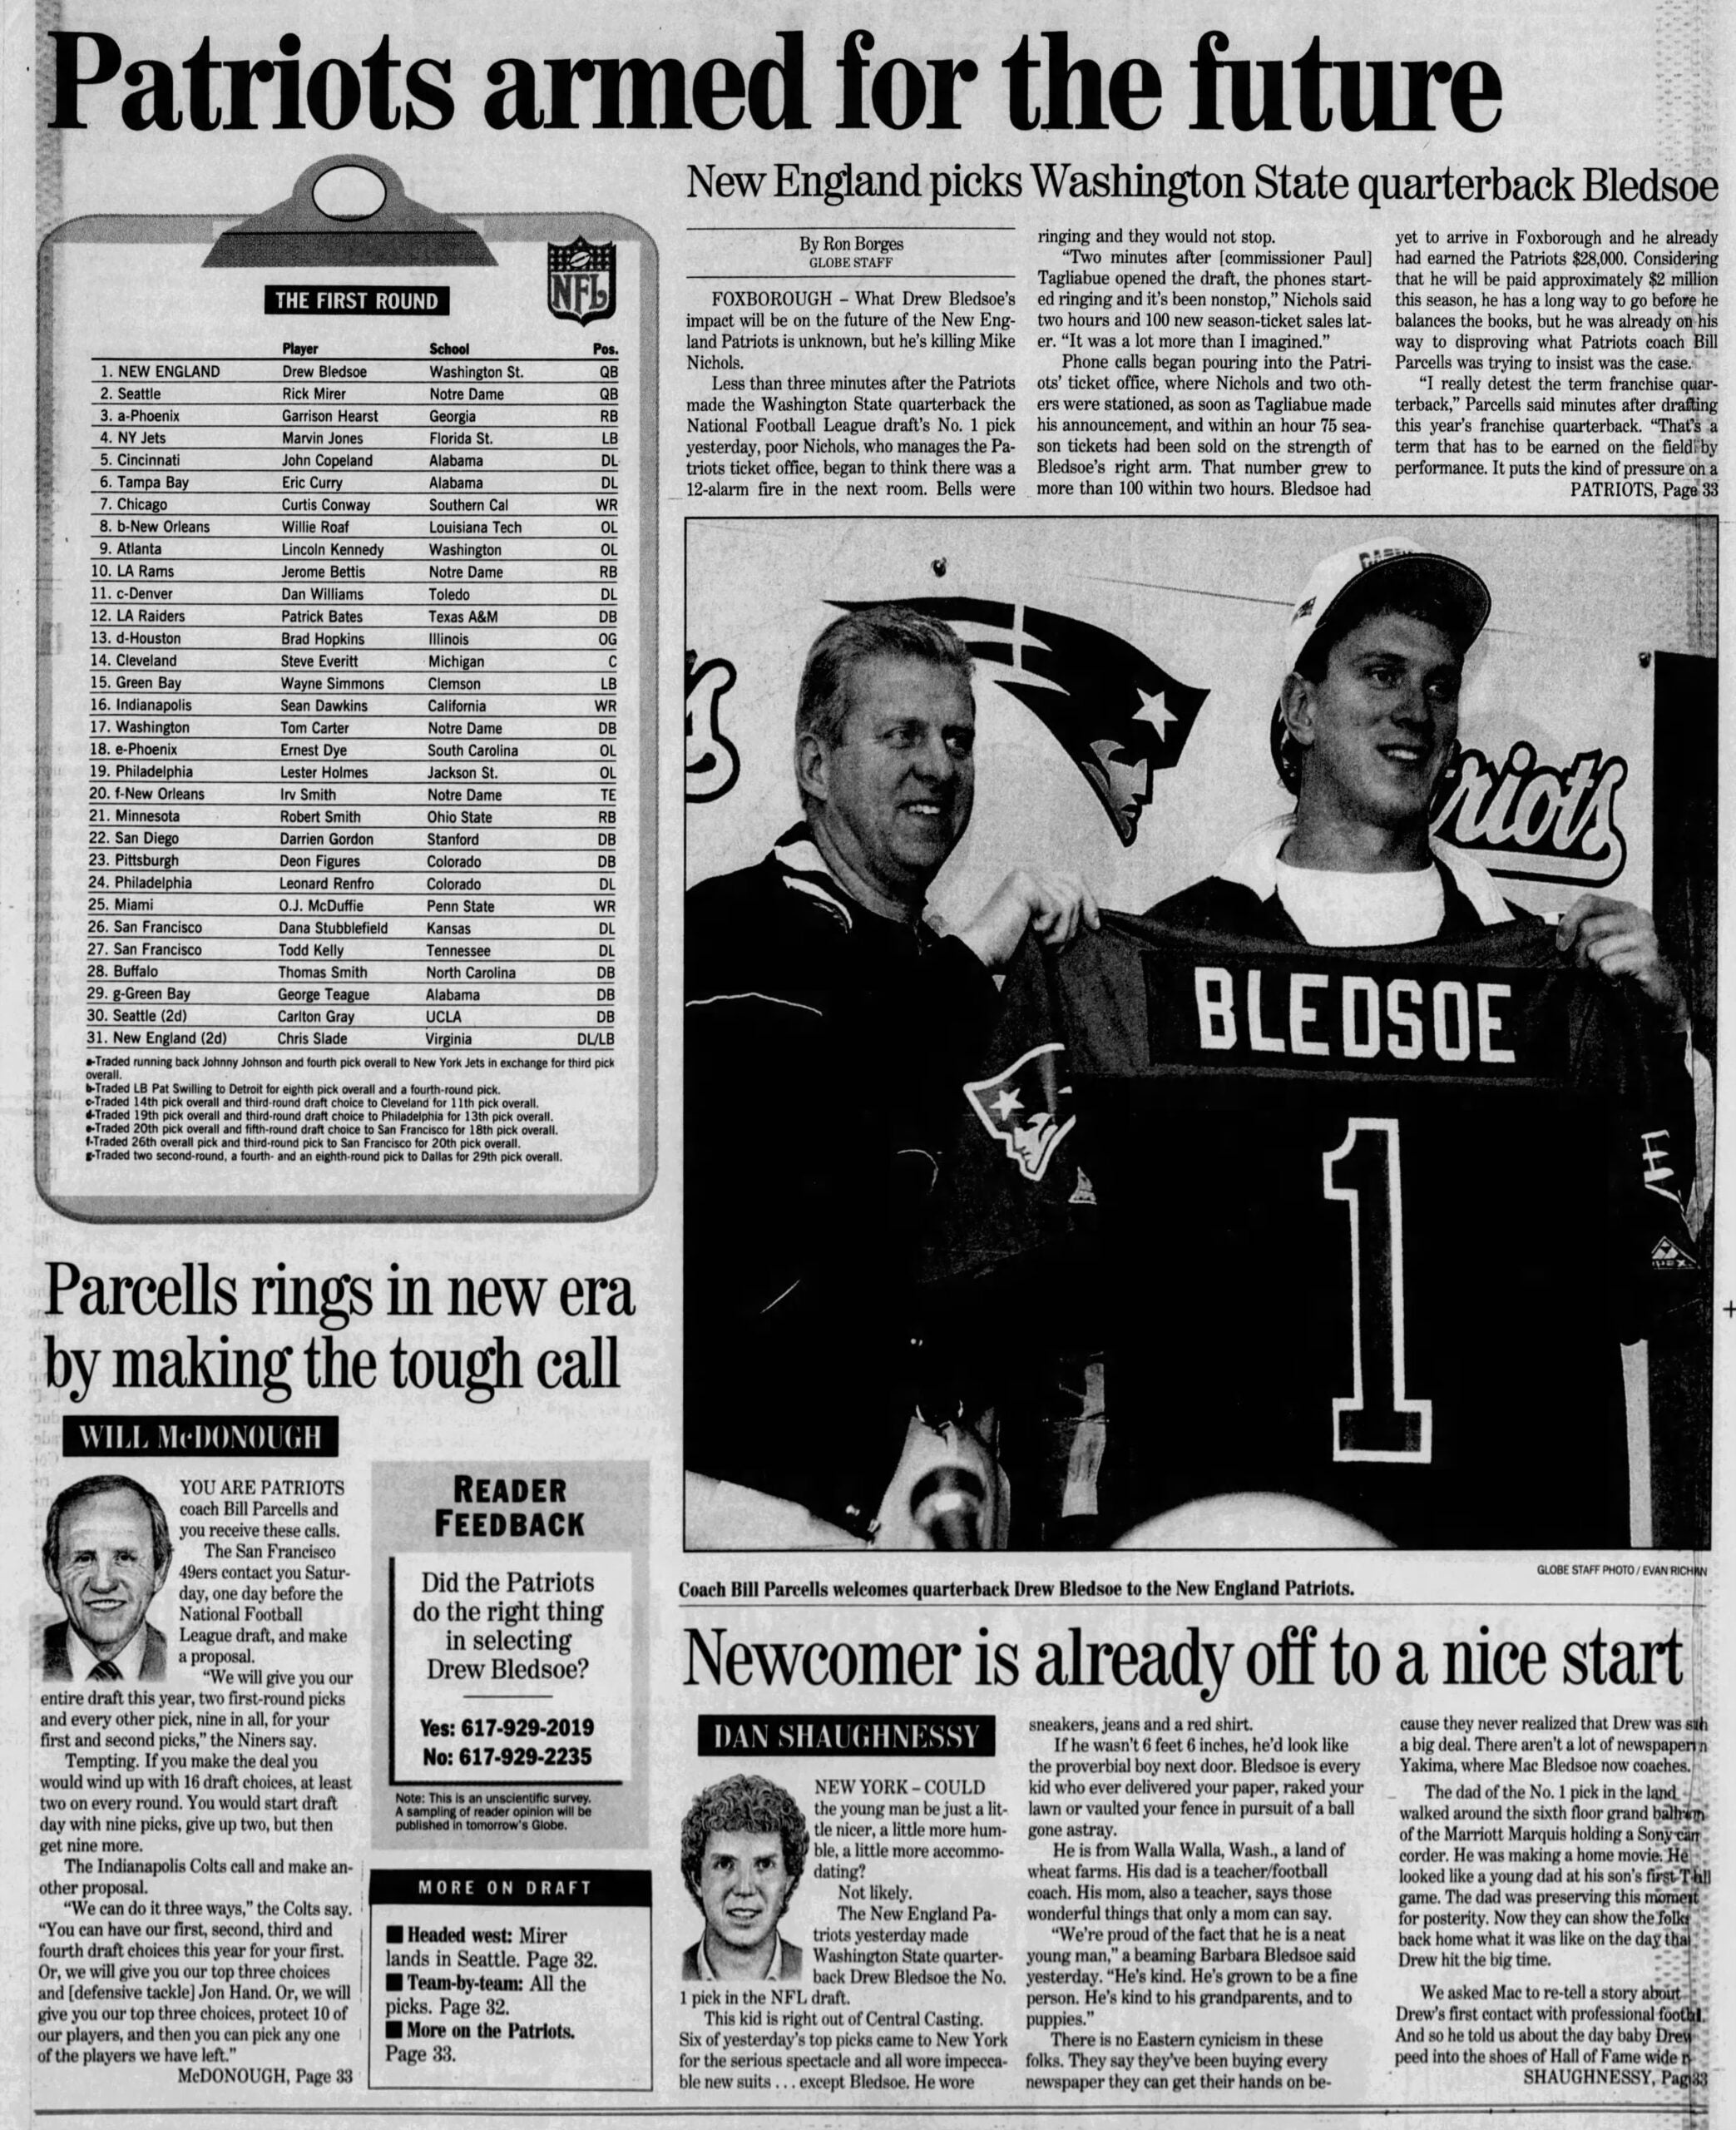 Drew Bledsoe Drafted By the Patriots 1993